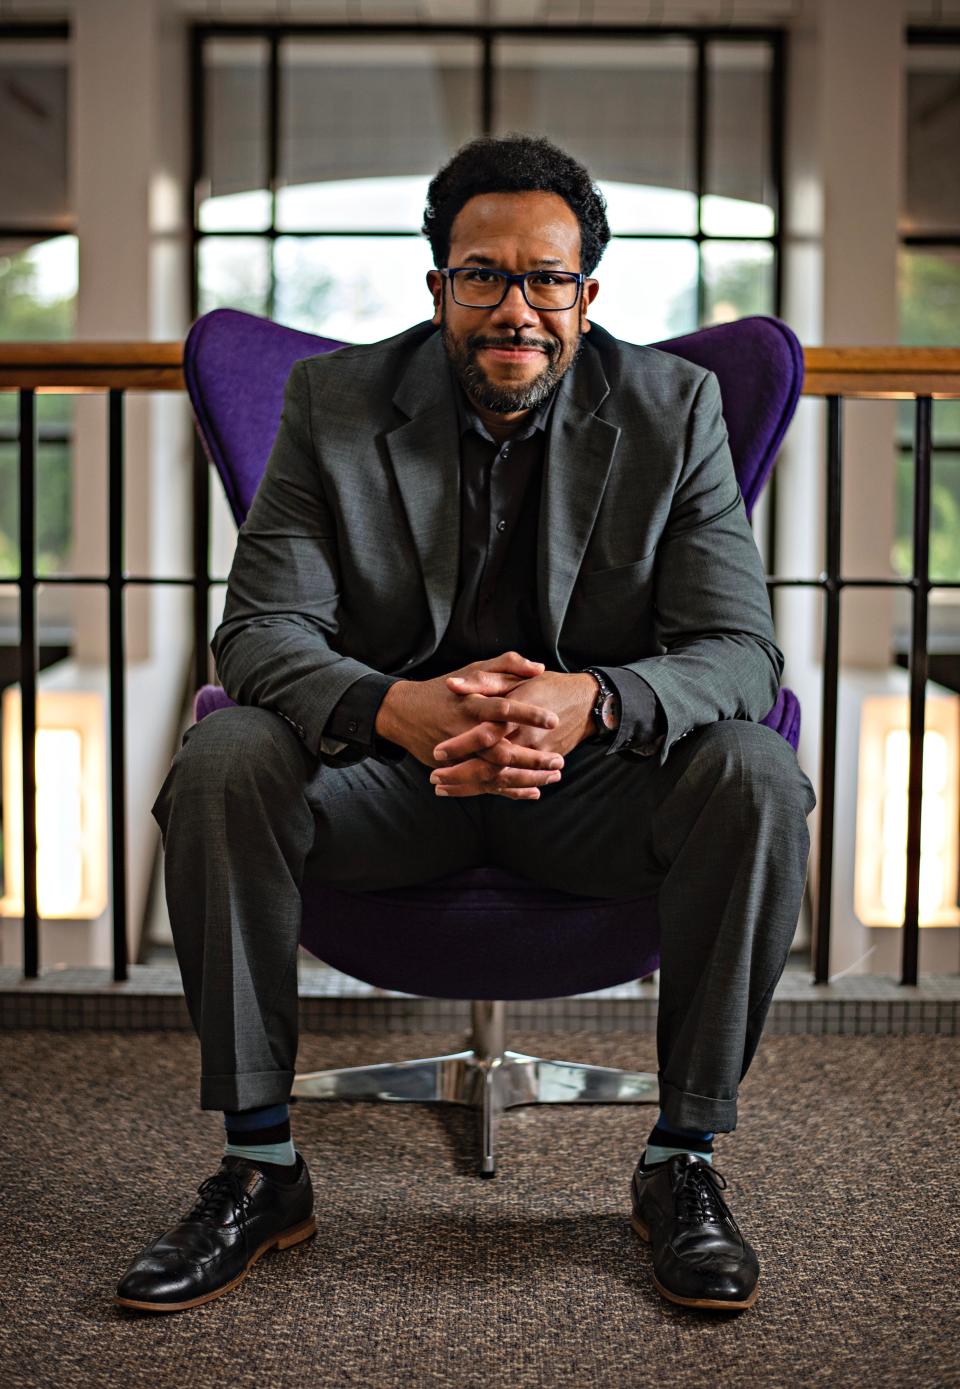 Wendell Riley will take over the role of Executive Director of the Robinson Film Center on August 1, 2022.